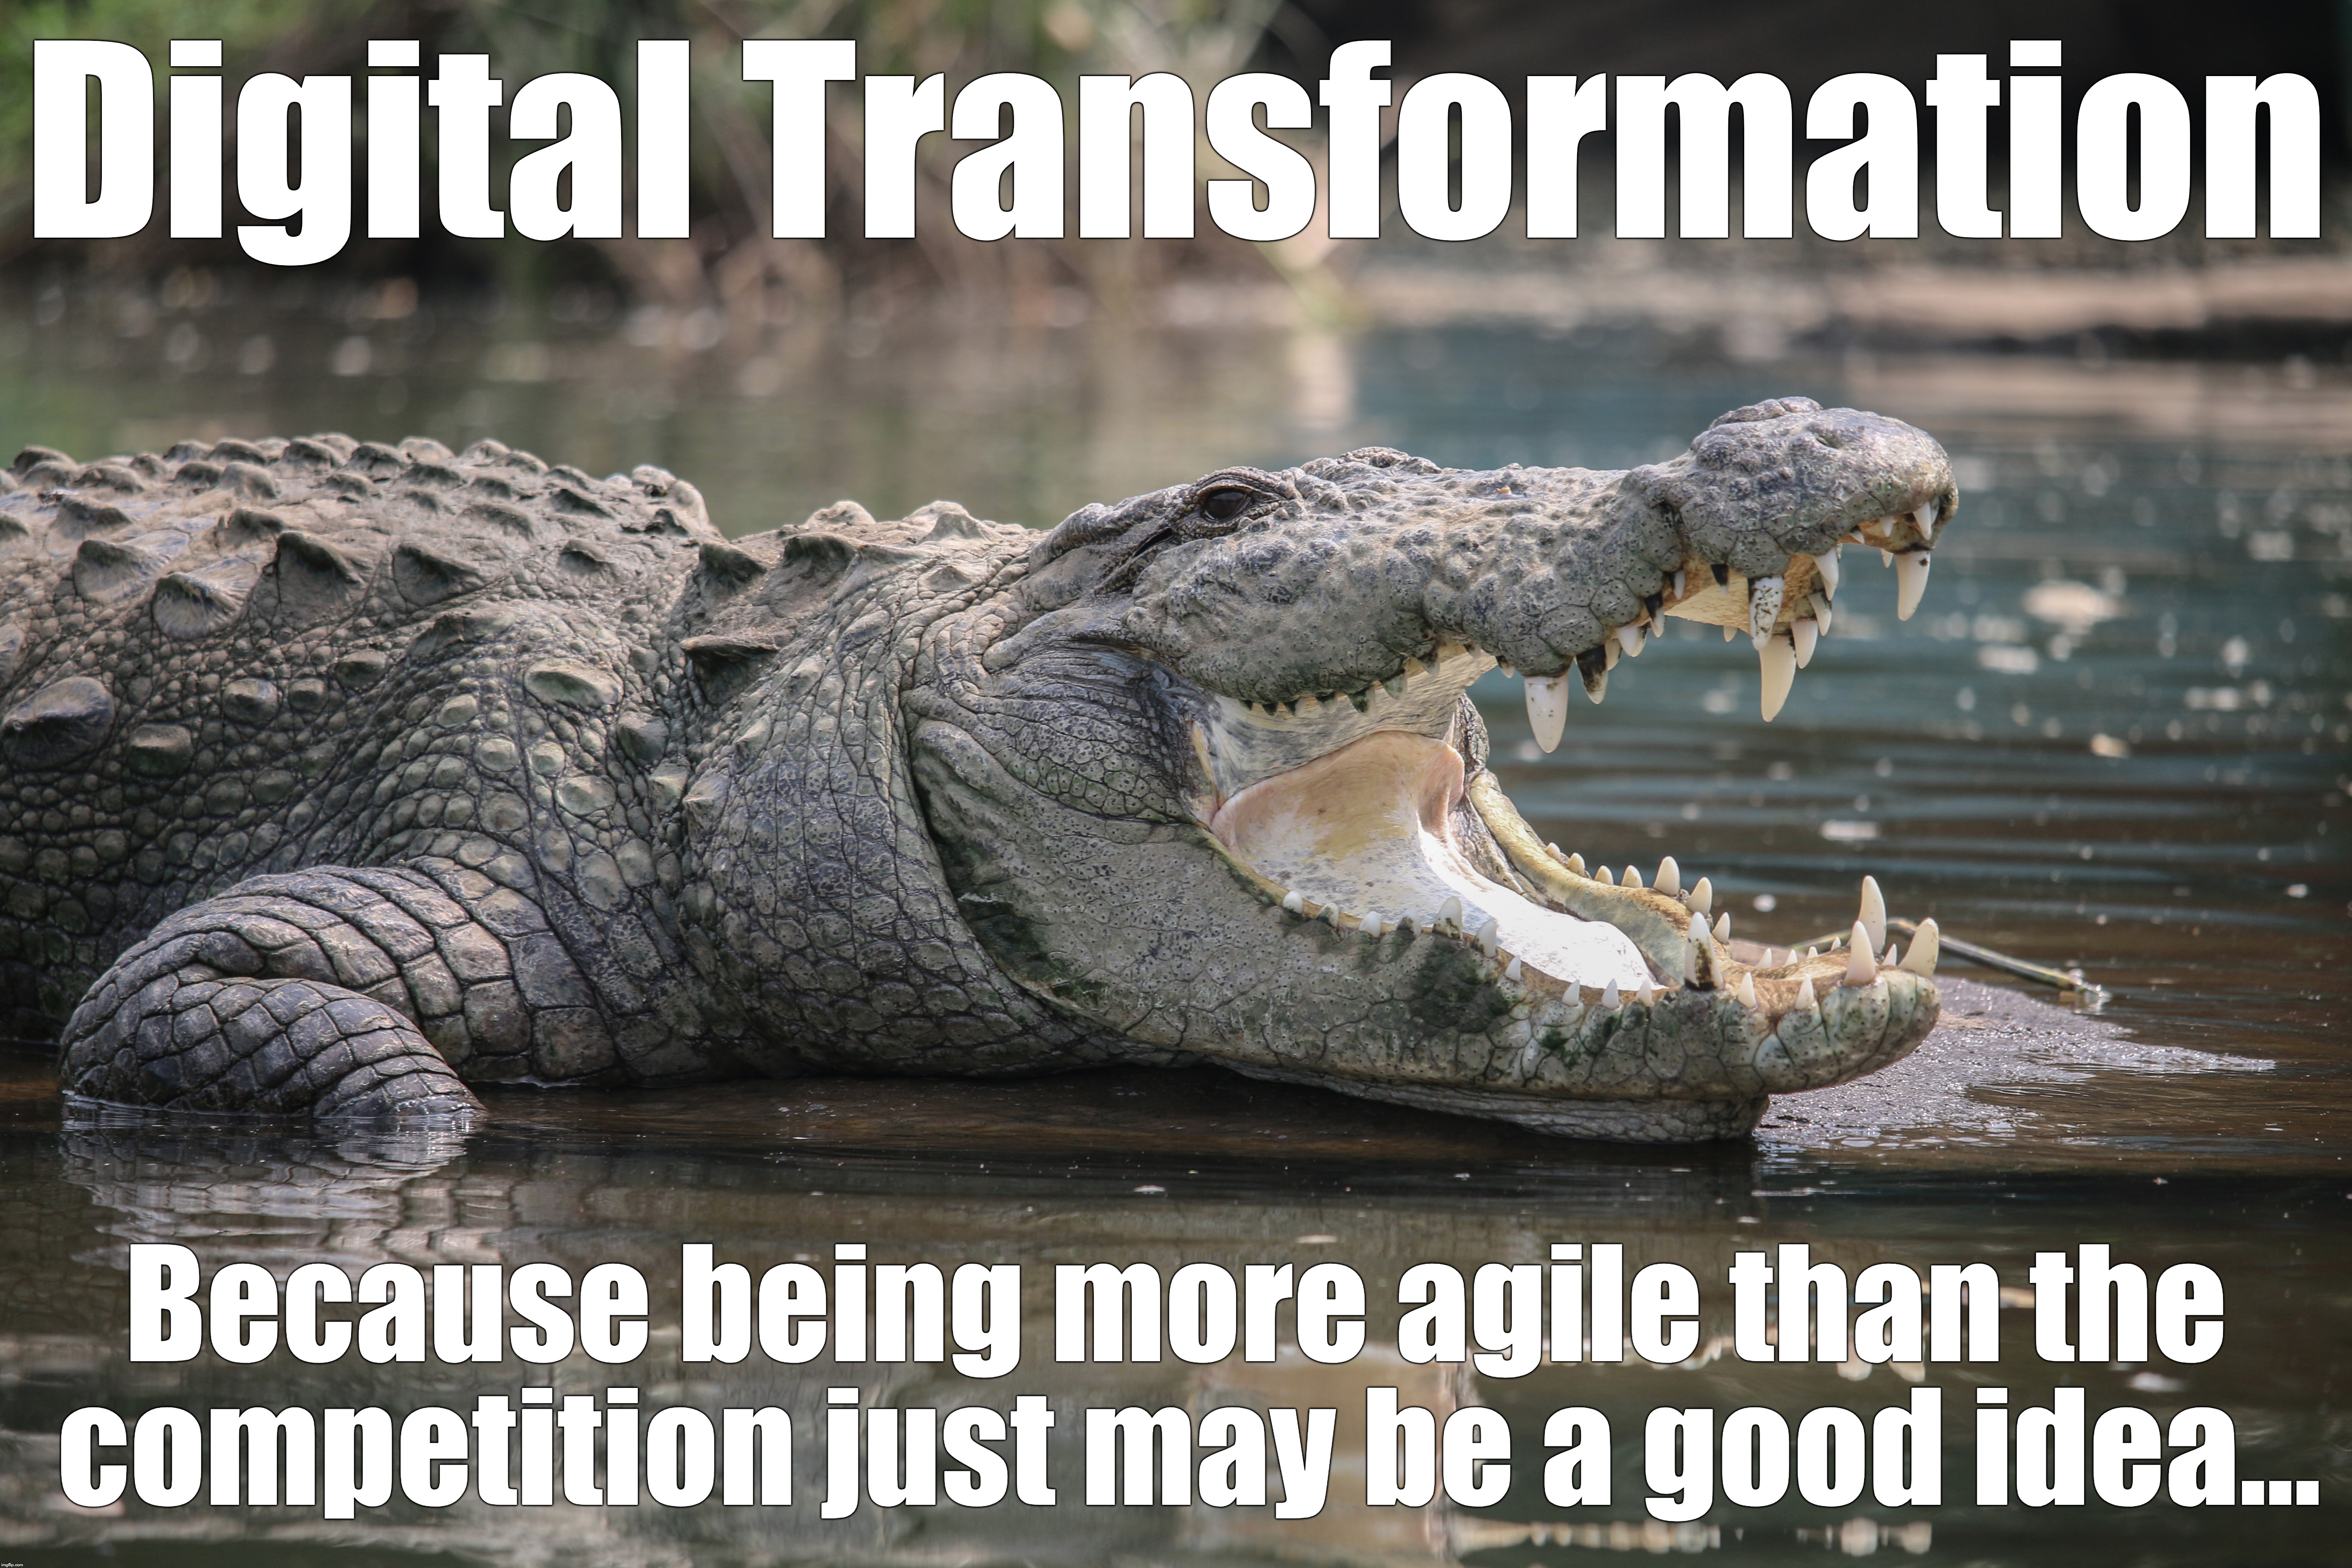 Digital Transformation: Because being more agile than the competition just may be a good idea...